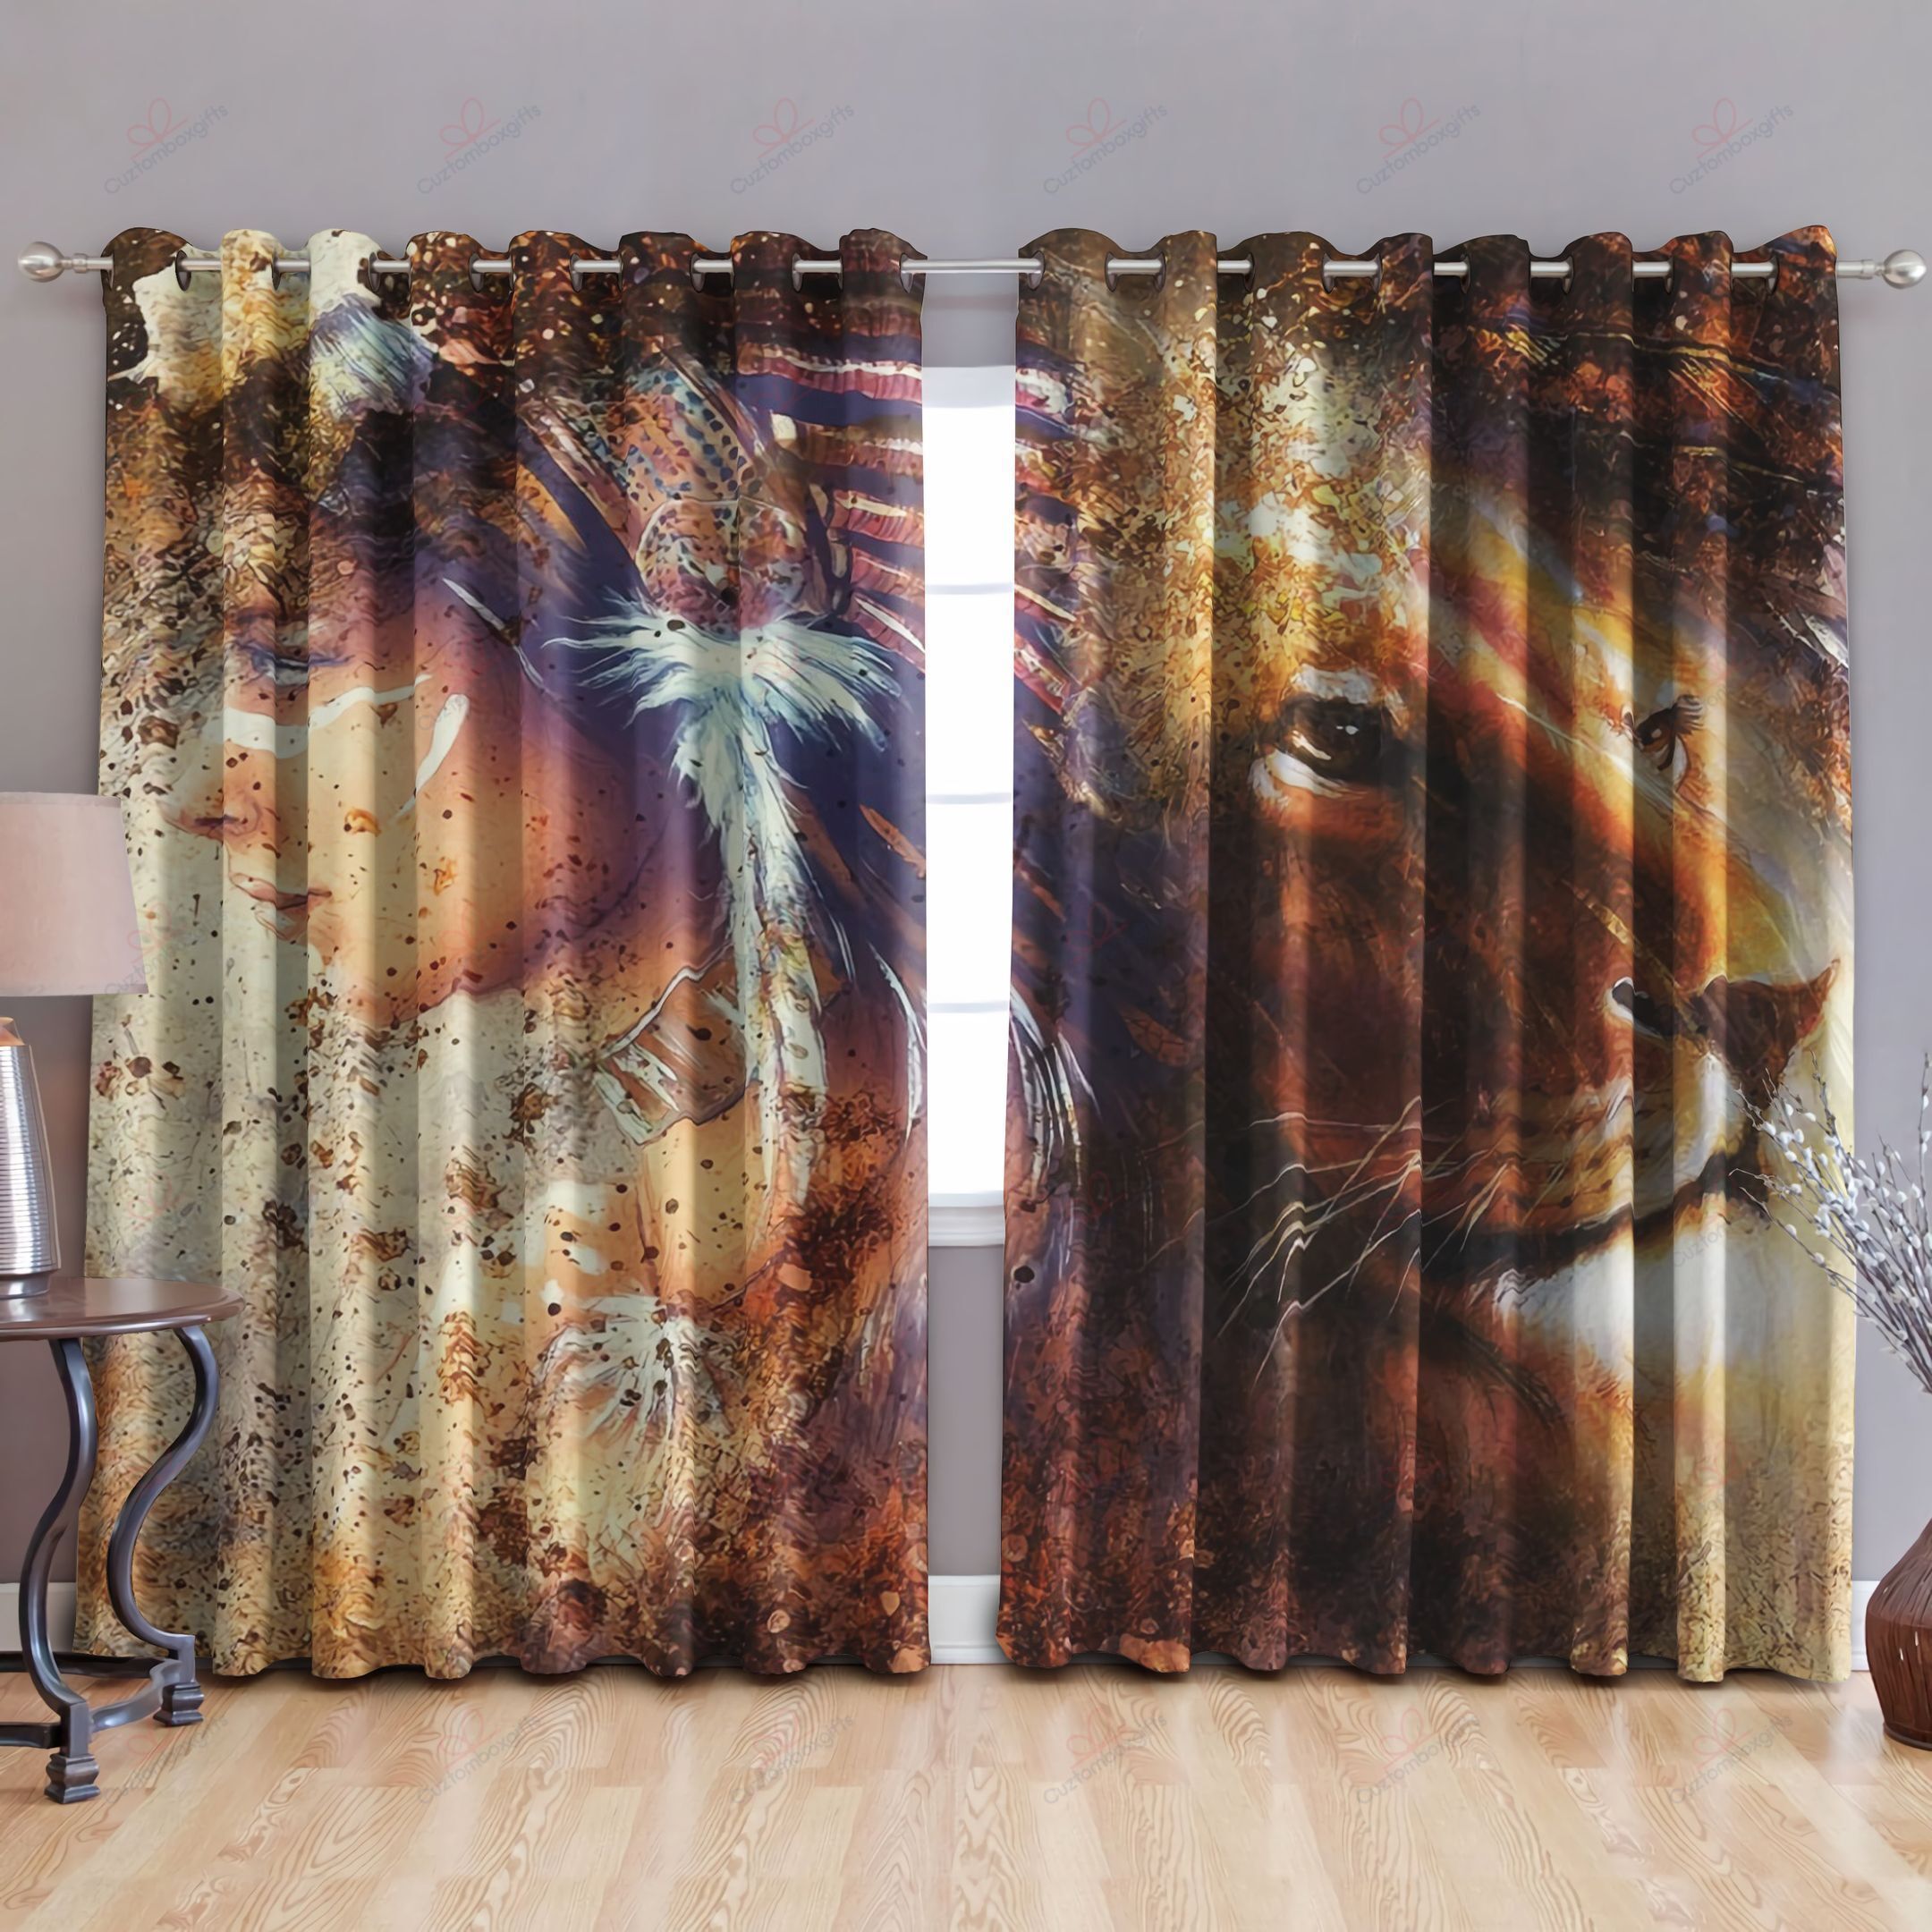 Native American Women And Lions Printed Window Curtain